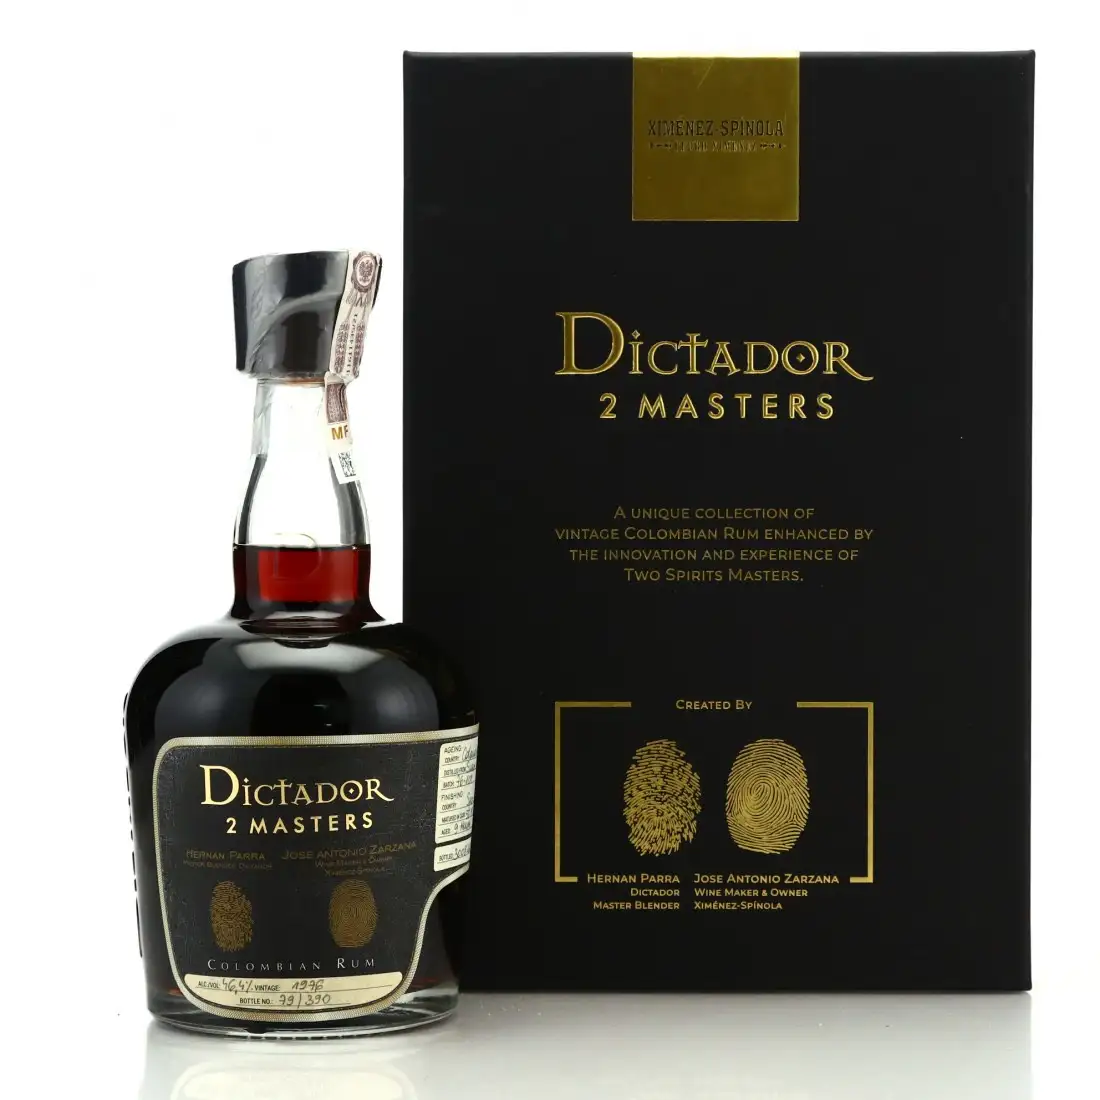 Image of the front of the bottle of the rum Dictador 2 Masters(Ximenez-Spinola)